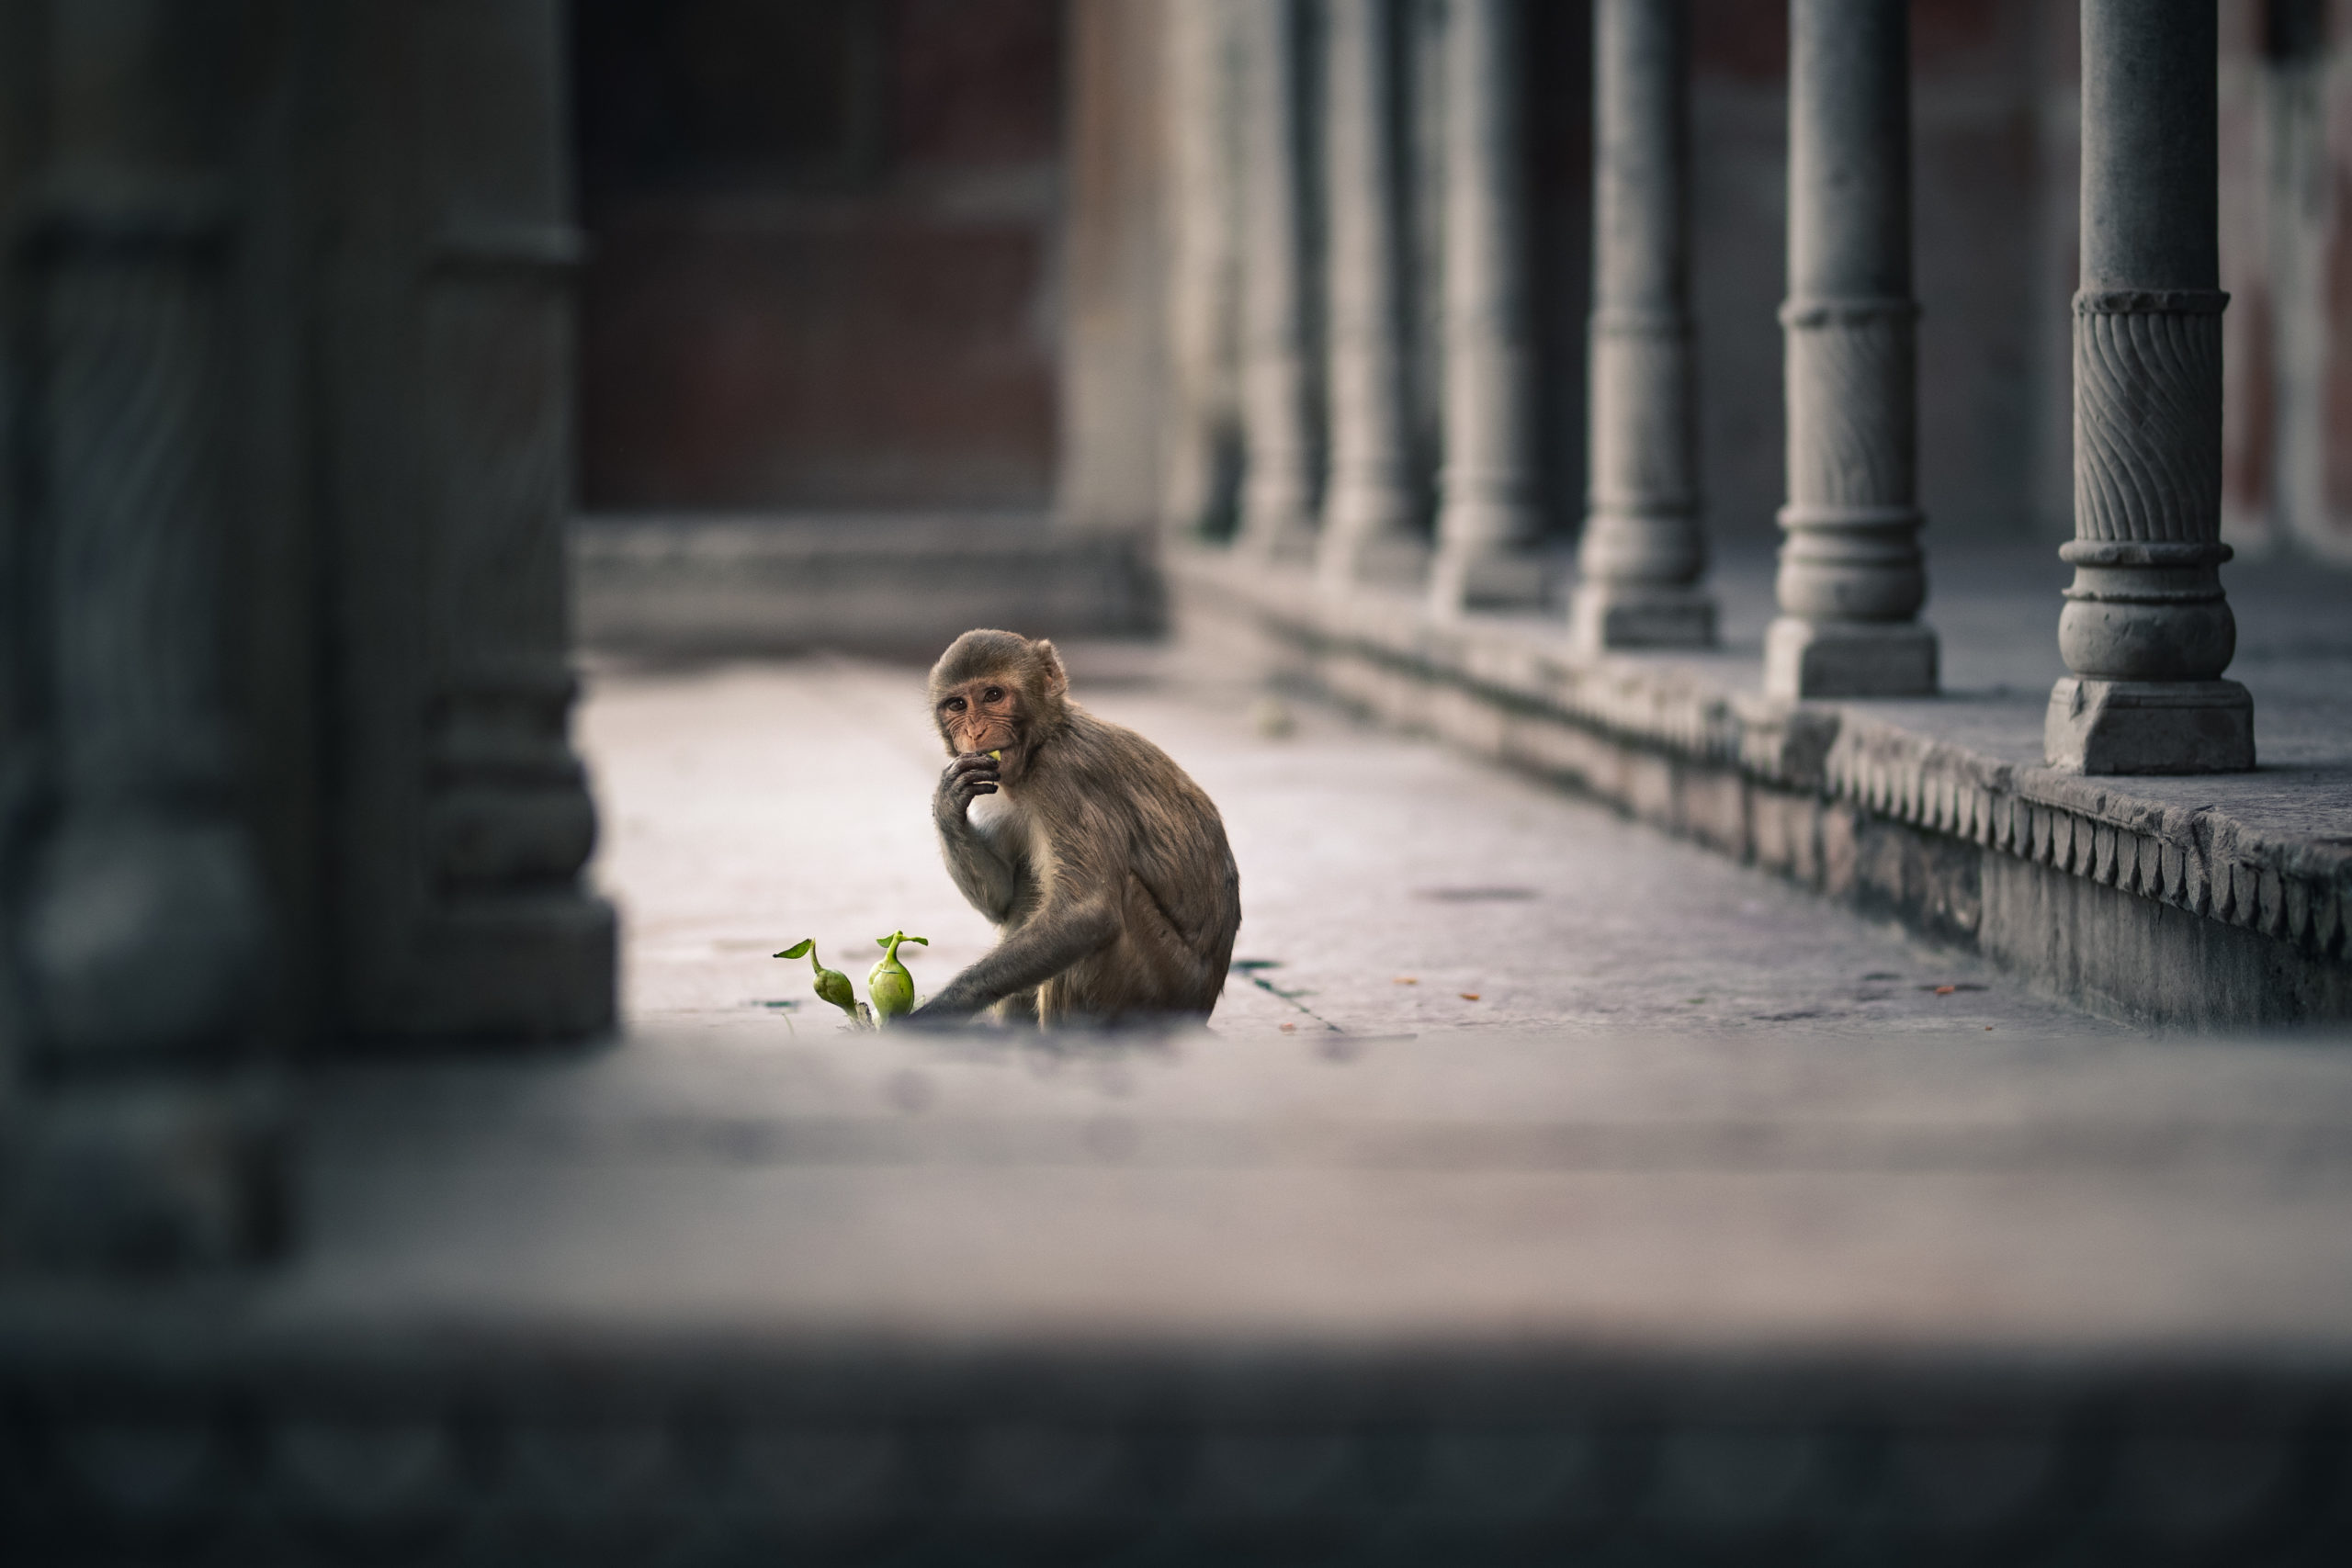 Street portrait photography of a monkey eating a plant on the streets of Mathura, India